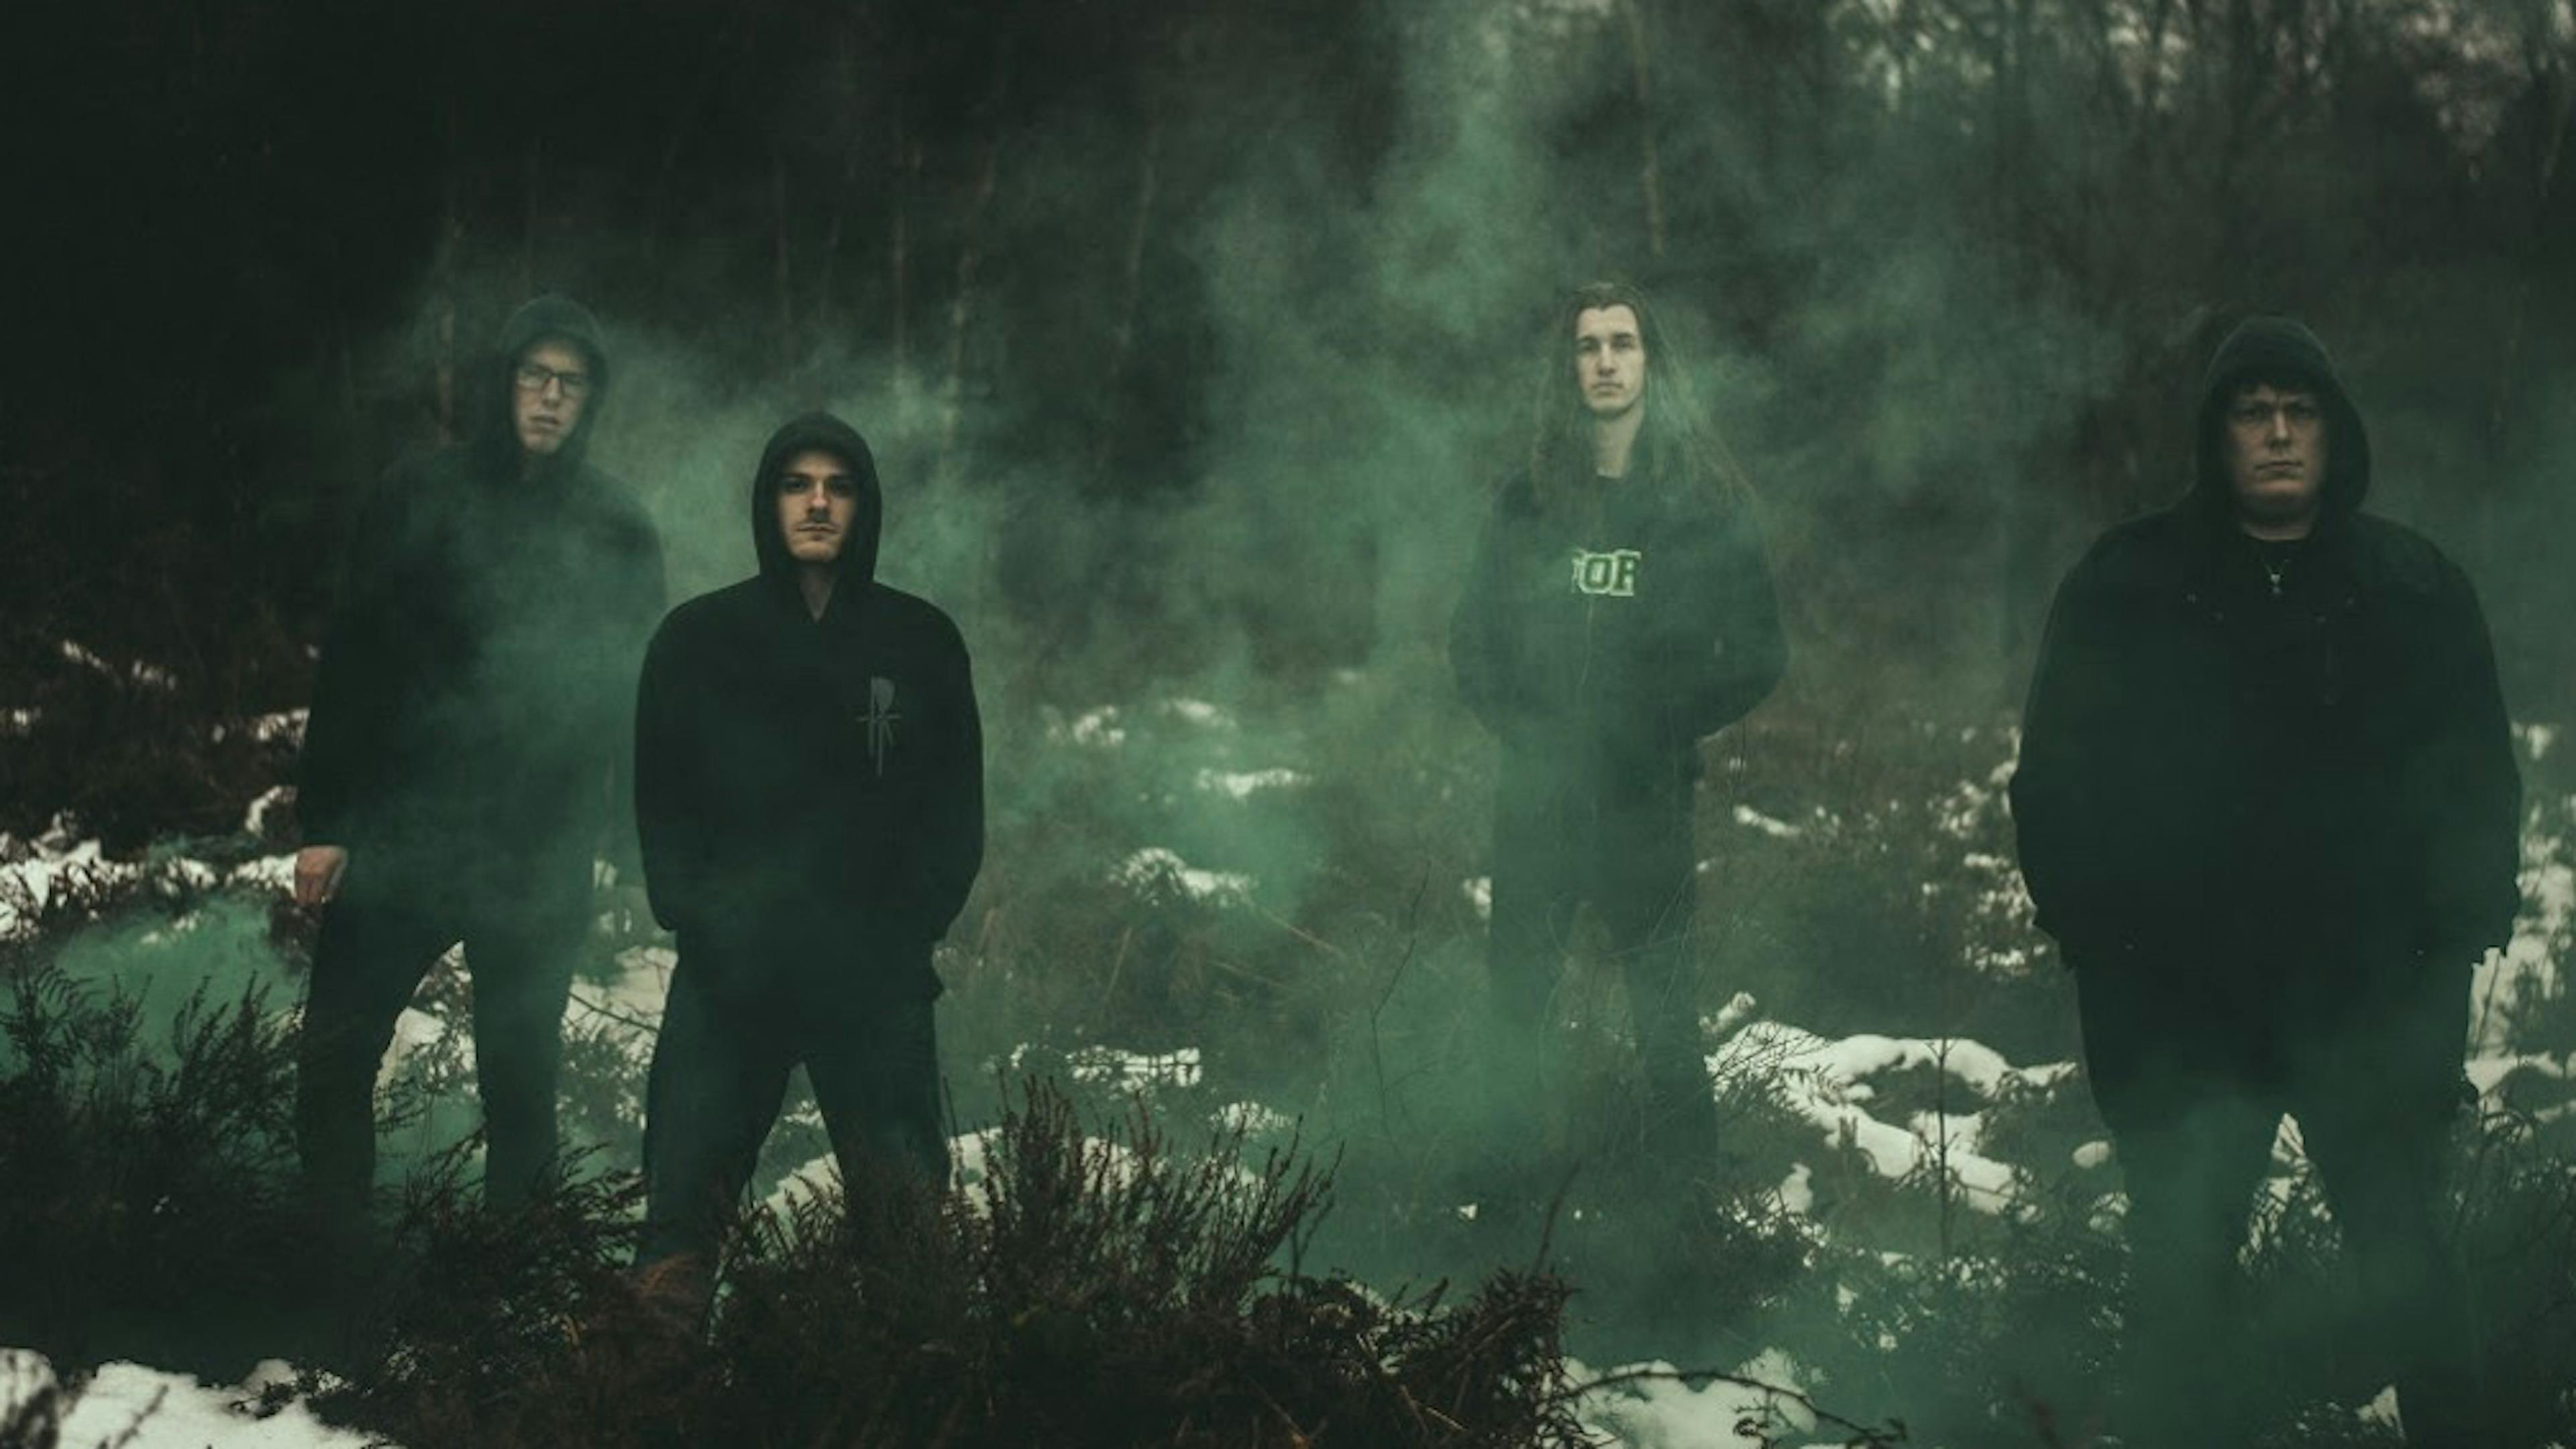 Listen To The Metal Debut Album Of The Year, Mire By Conjurer